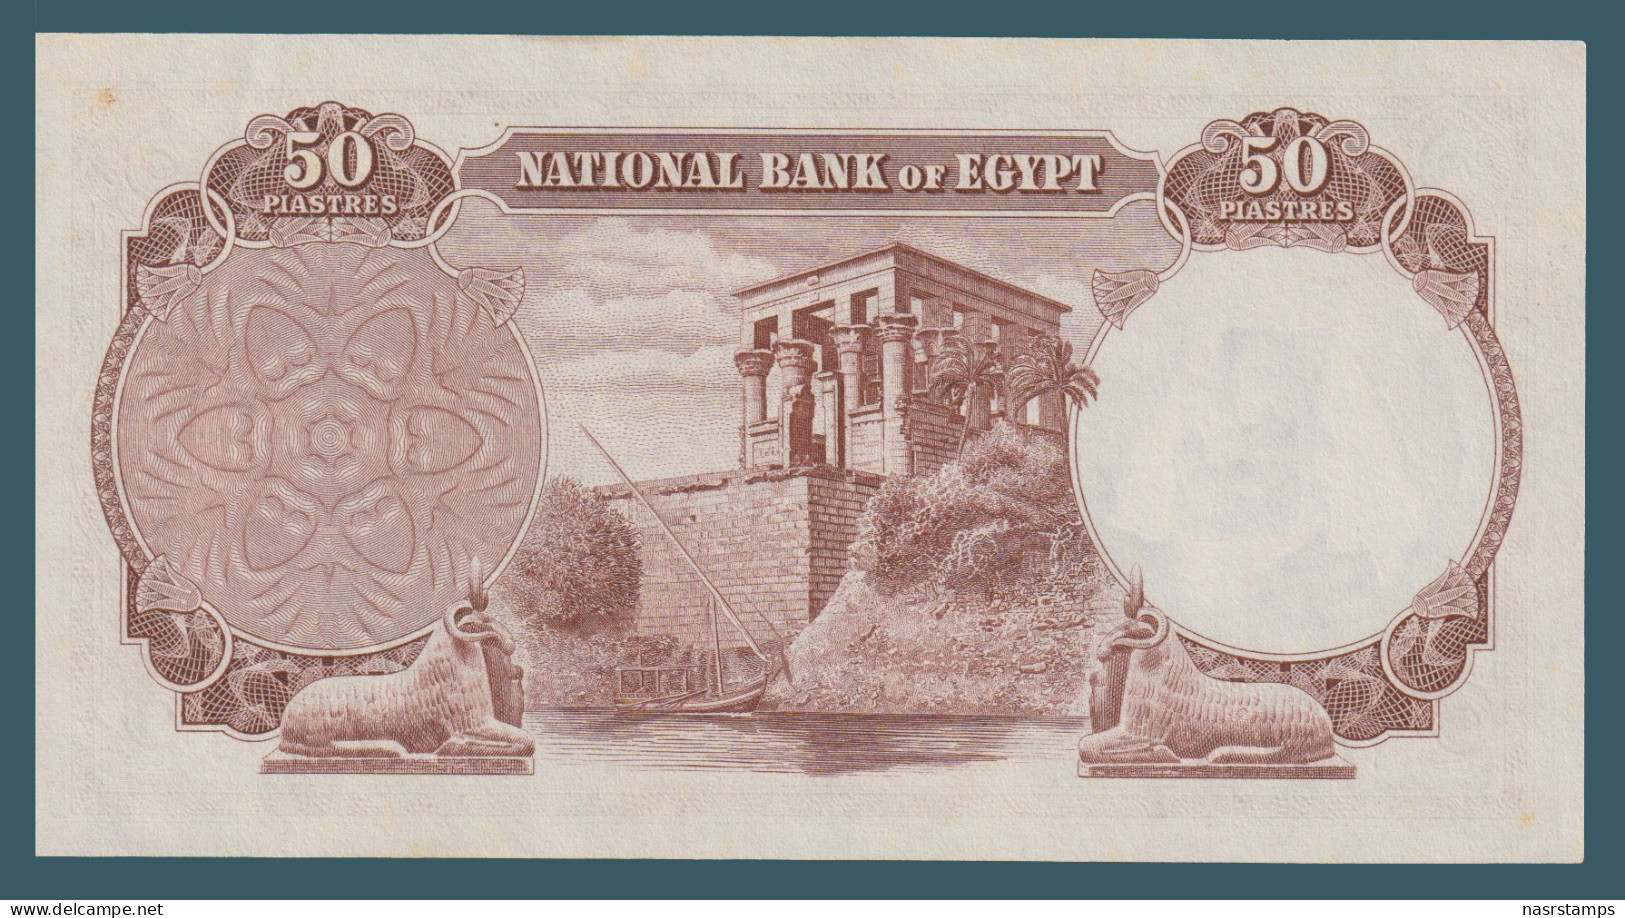 Egypt - 1954 - Rare - Last Prefix "10" - 50 Piasters - Pick-29 - Sign #8 - Fekry - XF - As Scan - Egypt